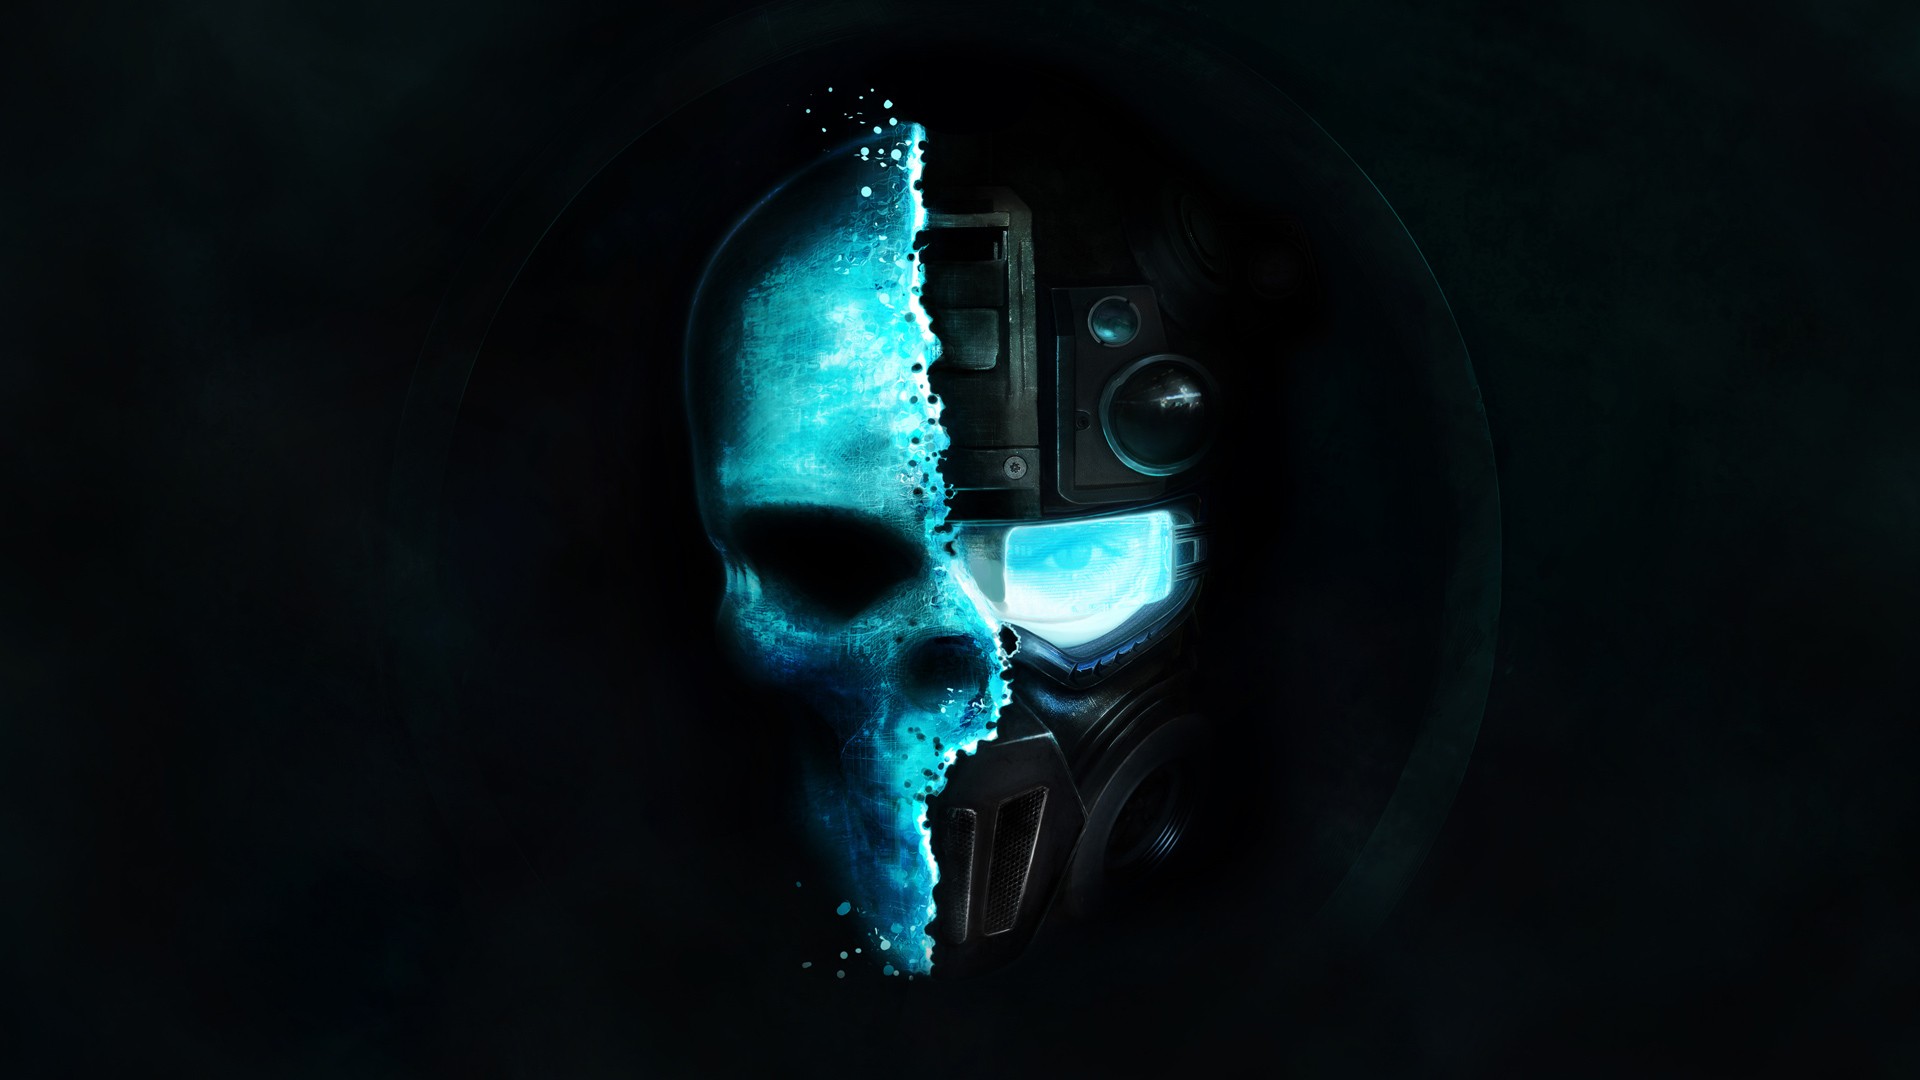 General 1920x1080 Tom Clancy's Ghost Recon military Tom Clancy's Ghost Recon: Future Soldier video games skull PC gaming blue